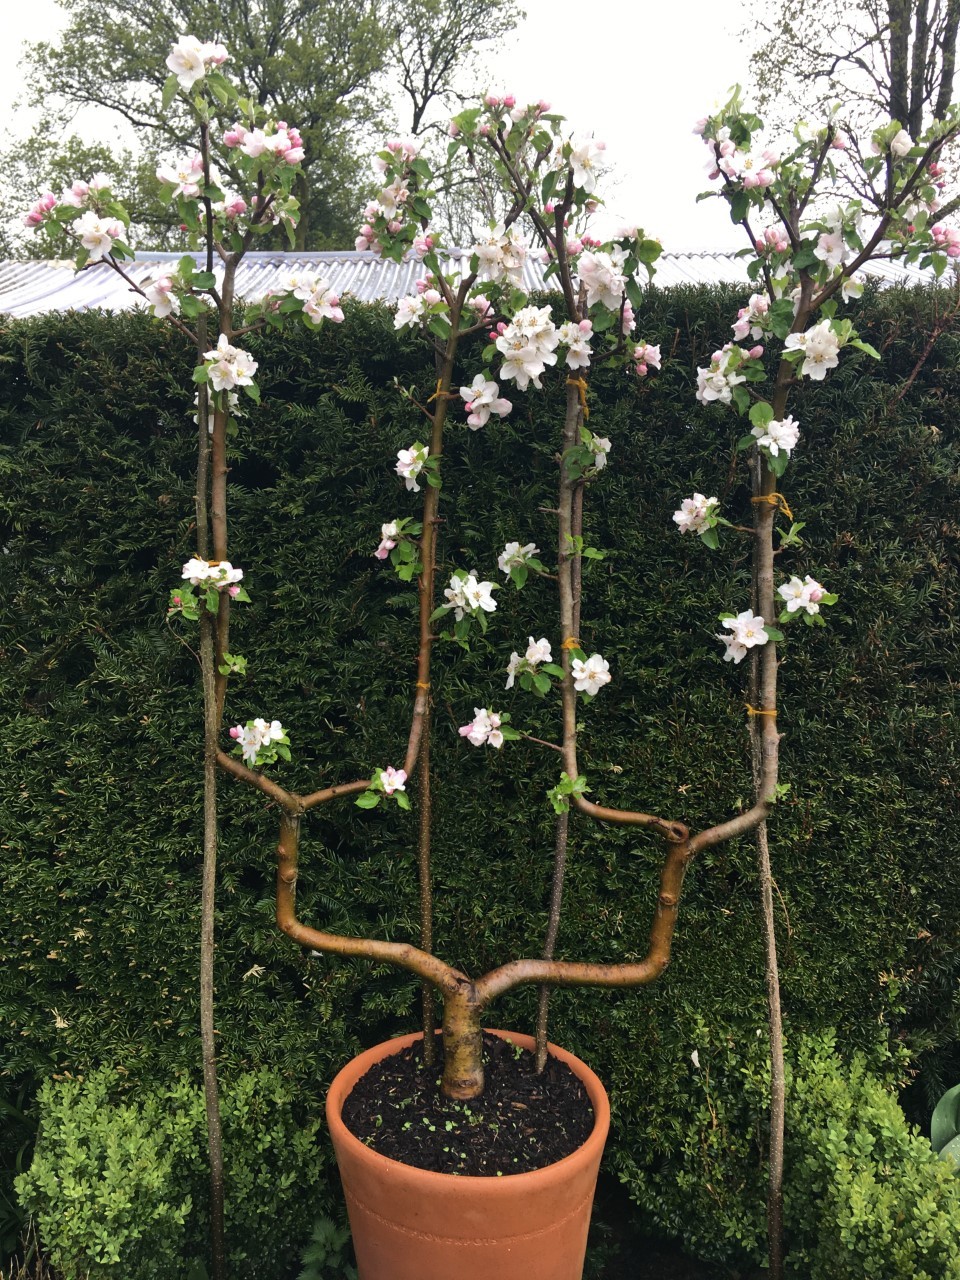 Cordon Trained Fruit Trees / Espalier Fruit Trees Create A Home Orchard With A Small Footprint River Road Farms : This produces a stem 2.4 m (8 ft).